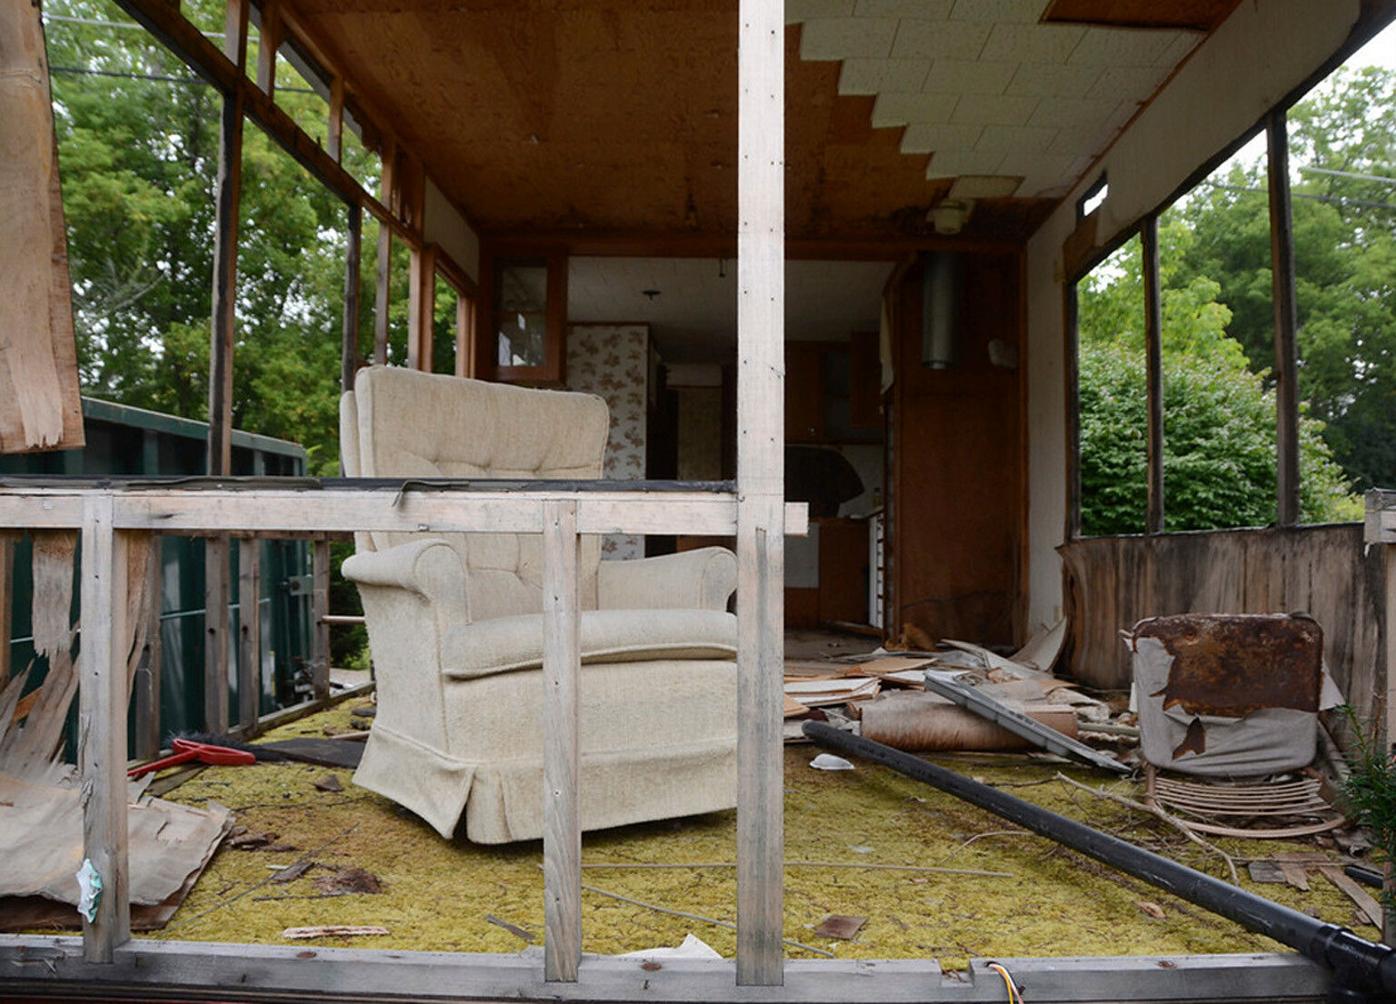 Two years later, damage from Tropical Storm Irene still resonates in Northern Berkshire